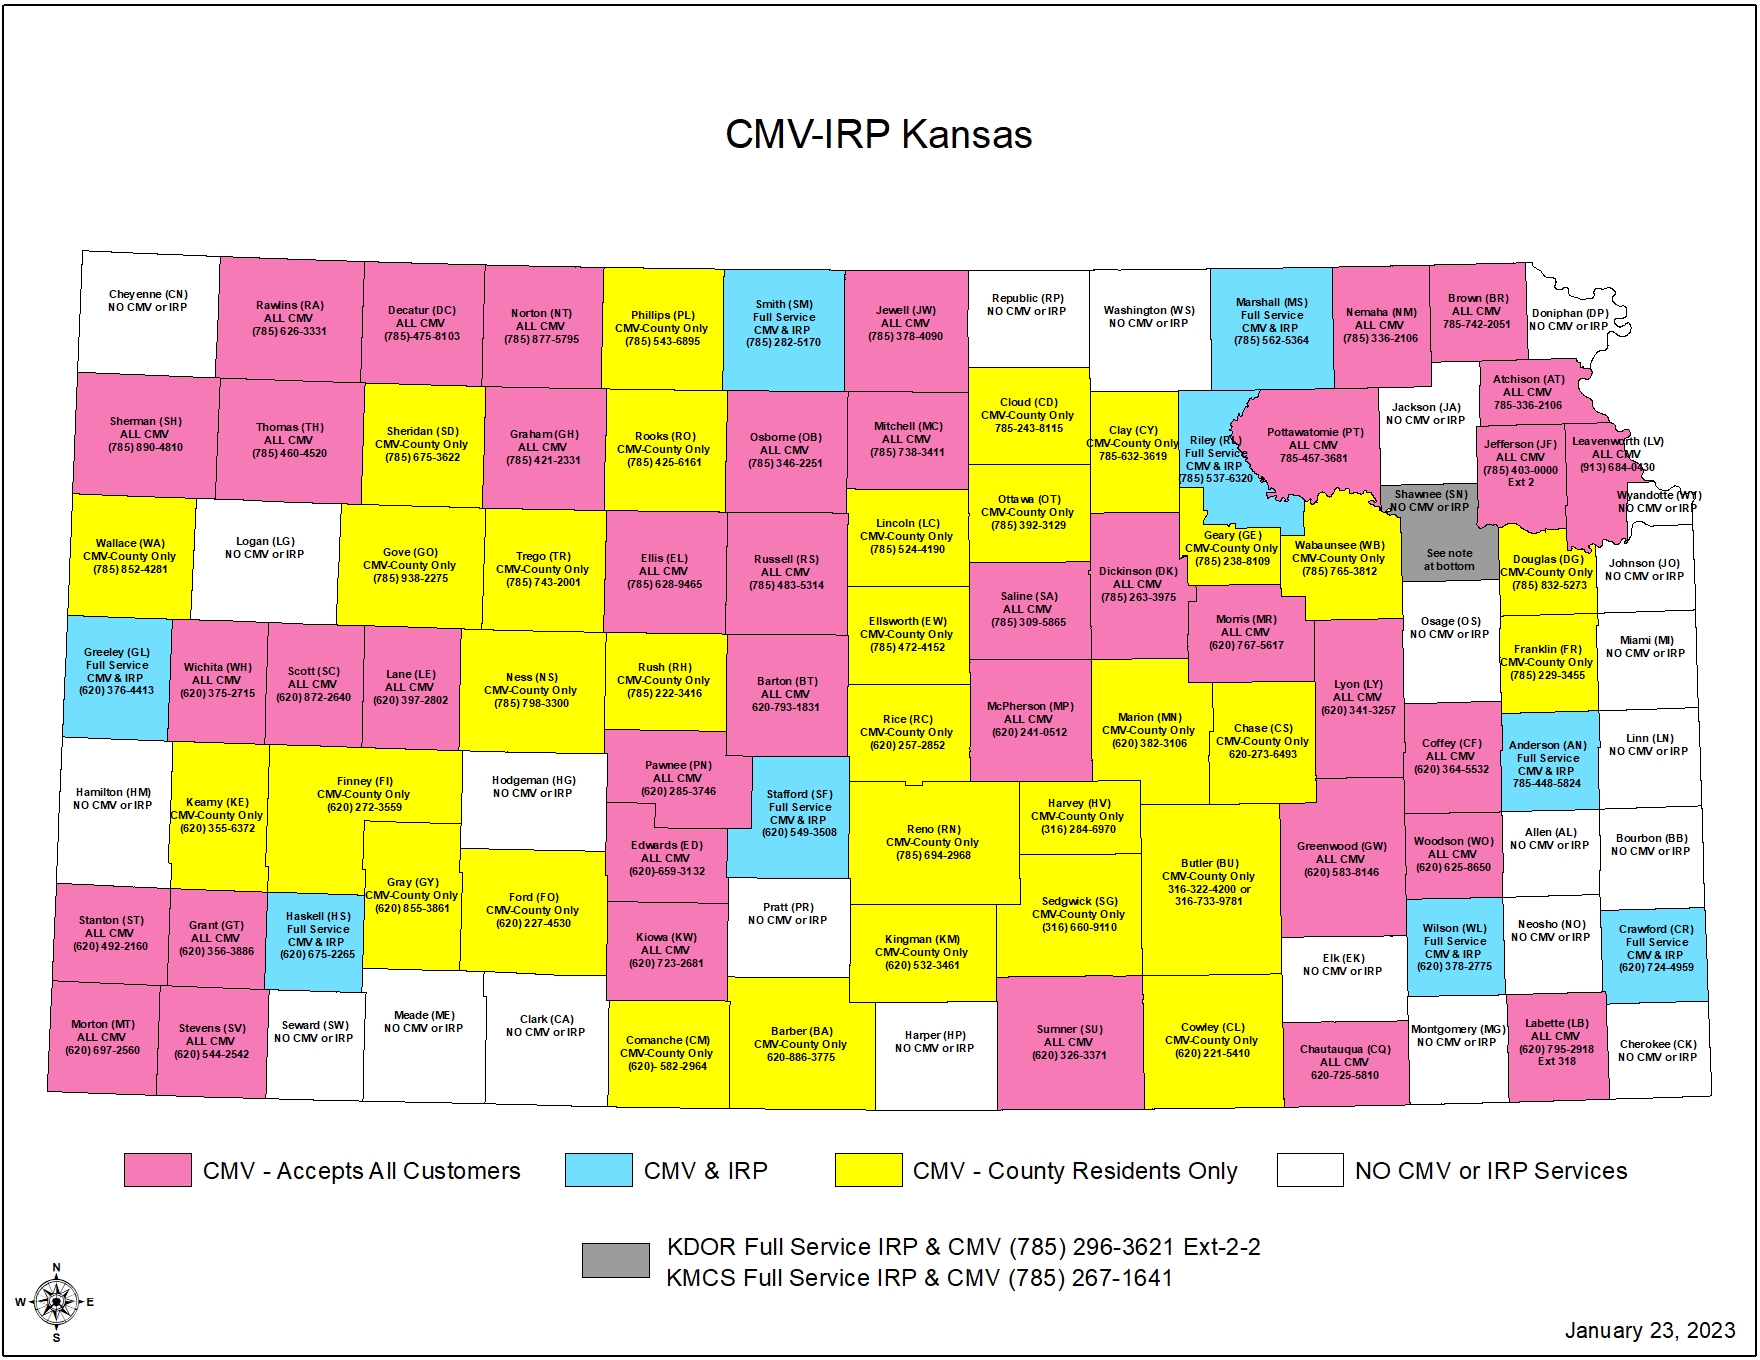 CMV services by county